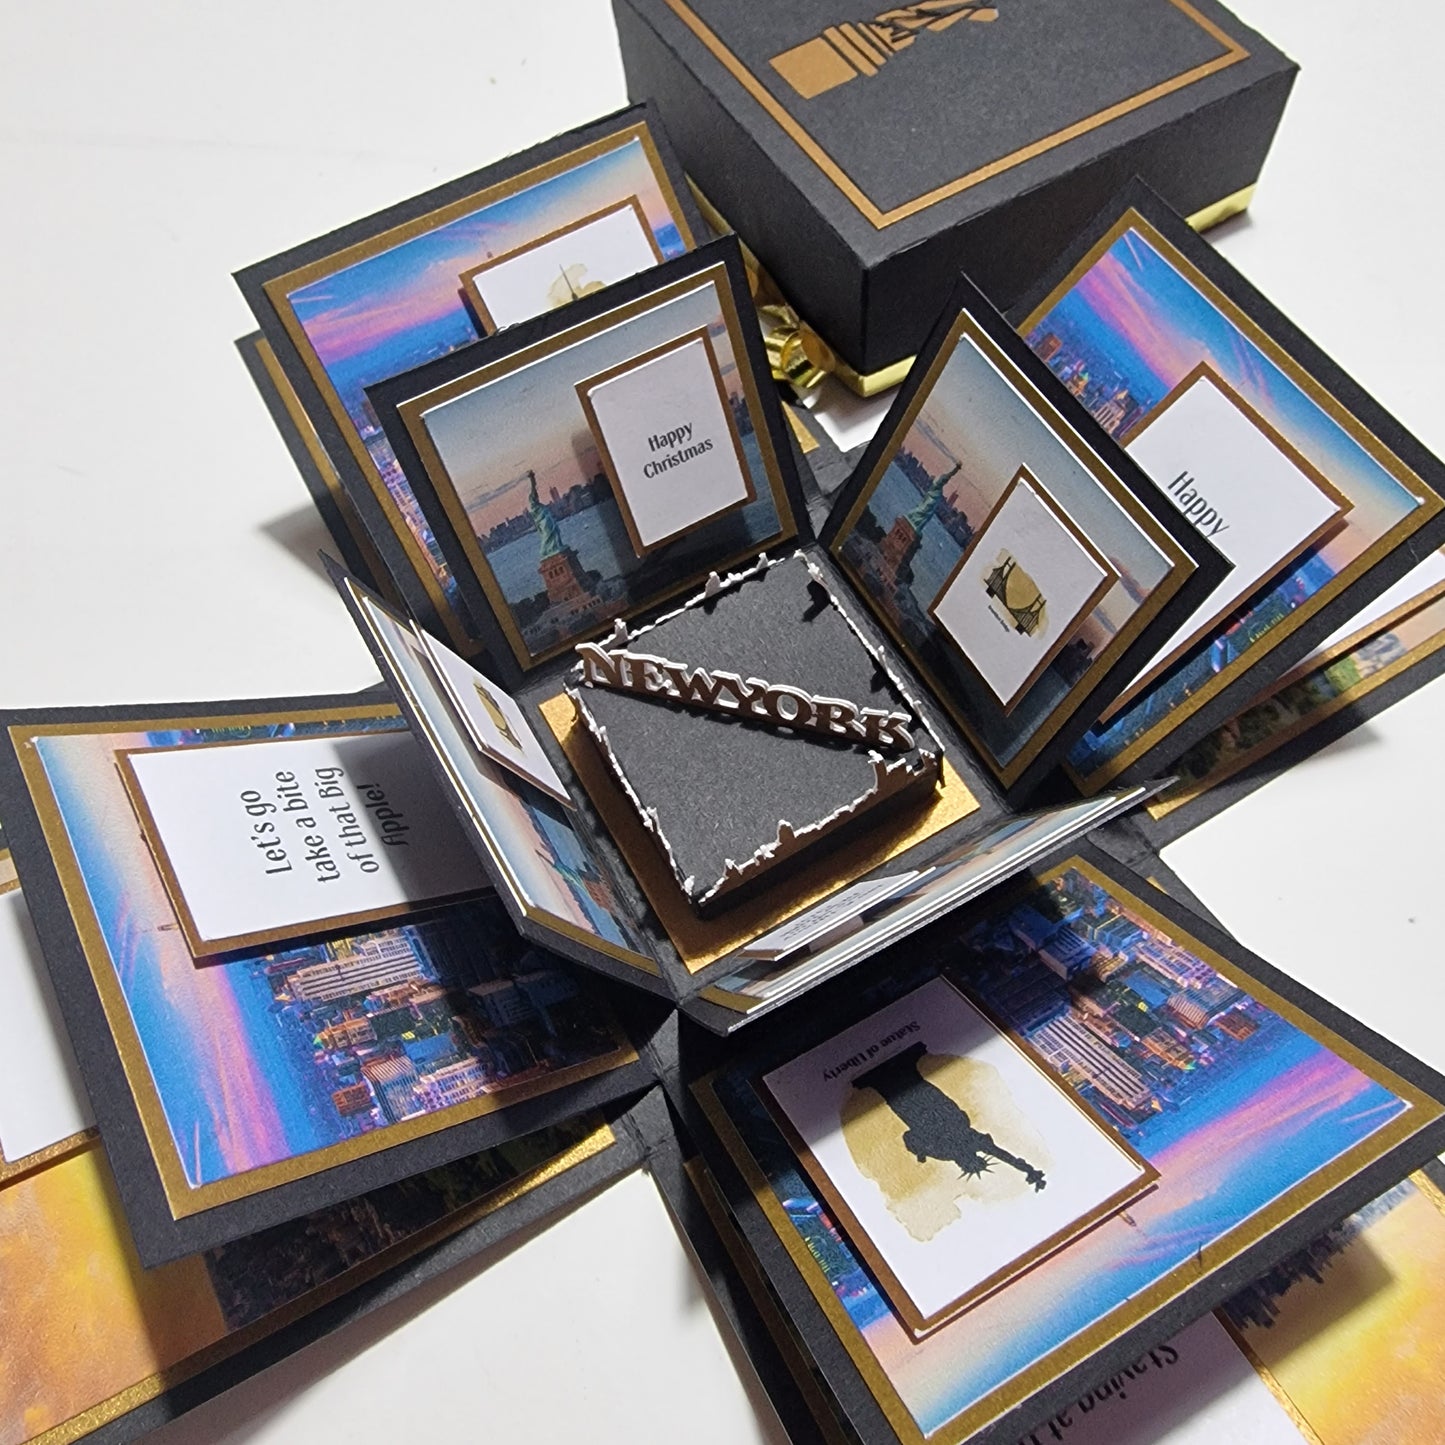 Black & Gold New York Trip Reveal Exploding Occasion Box. Featuring land mark images papers, verses & messages. Personalised with your own trip information, names dates etc